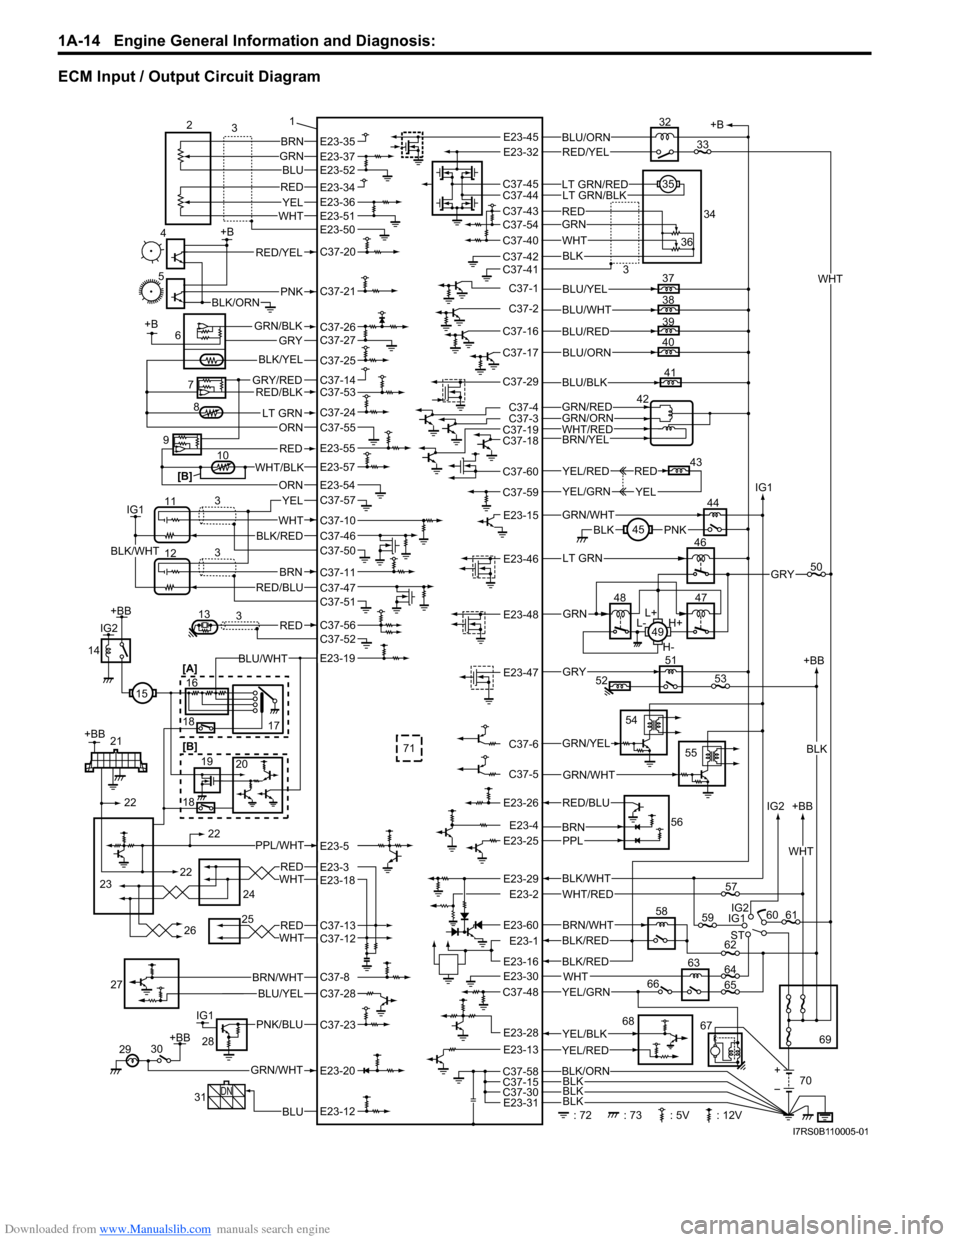 SUZUKI SWIFT 2007 2.G Service Workshop Manual Downloaded from www.Manualslib.com manuals search engine 1A-14 Engine General Information and Diagnosis: 
ECM Input / Output Circuit Diagram
+B
58
IG1 +BB
ST IG2 IG2
60 61
69
BLK/WHT
WHT/RED
BRN/WHTBL